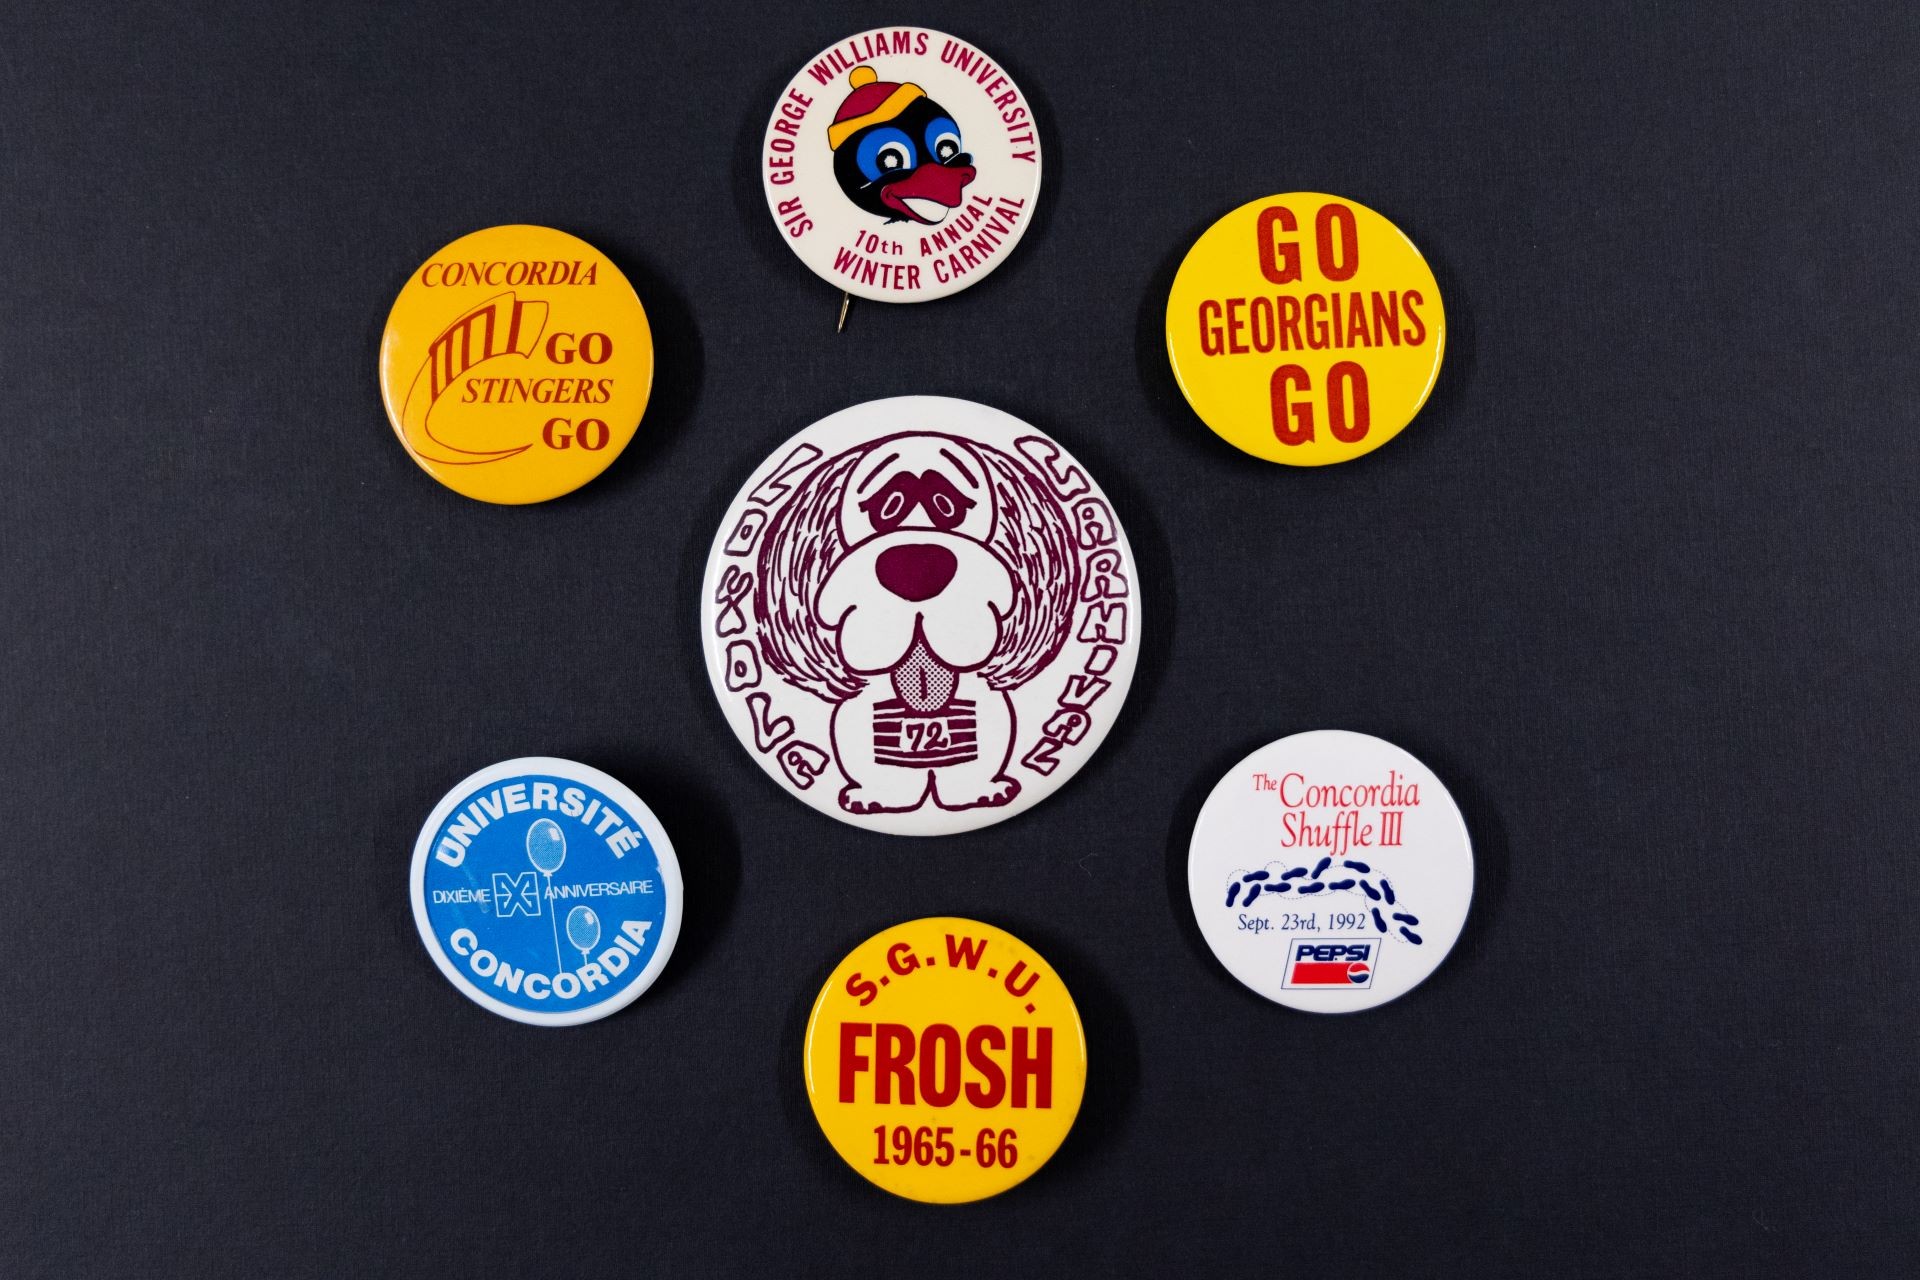 A collection of six assorted badges with different logos and text representing various university events and milestones.